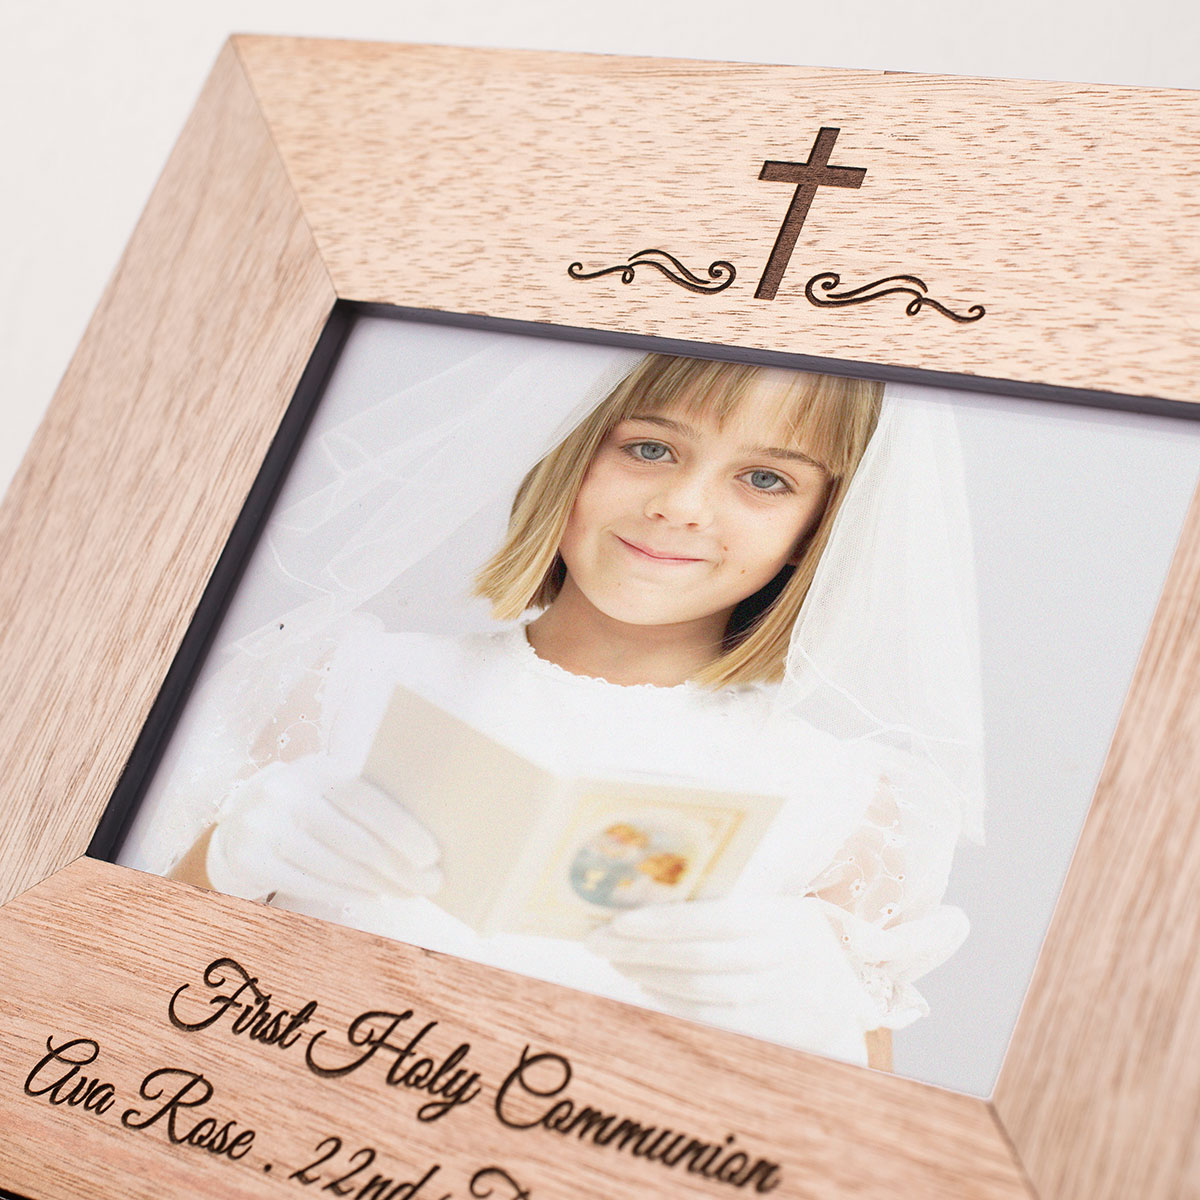 Engraved Wooden Photo Frame - Holy Communion